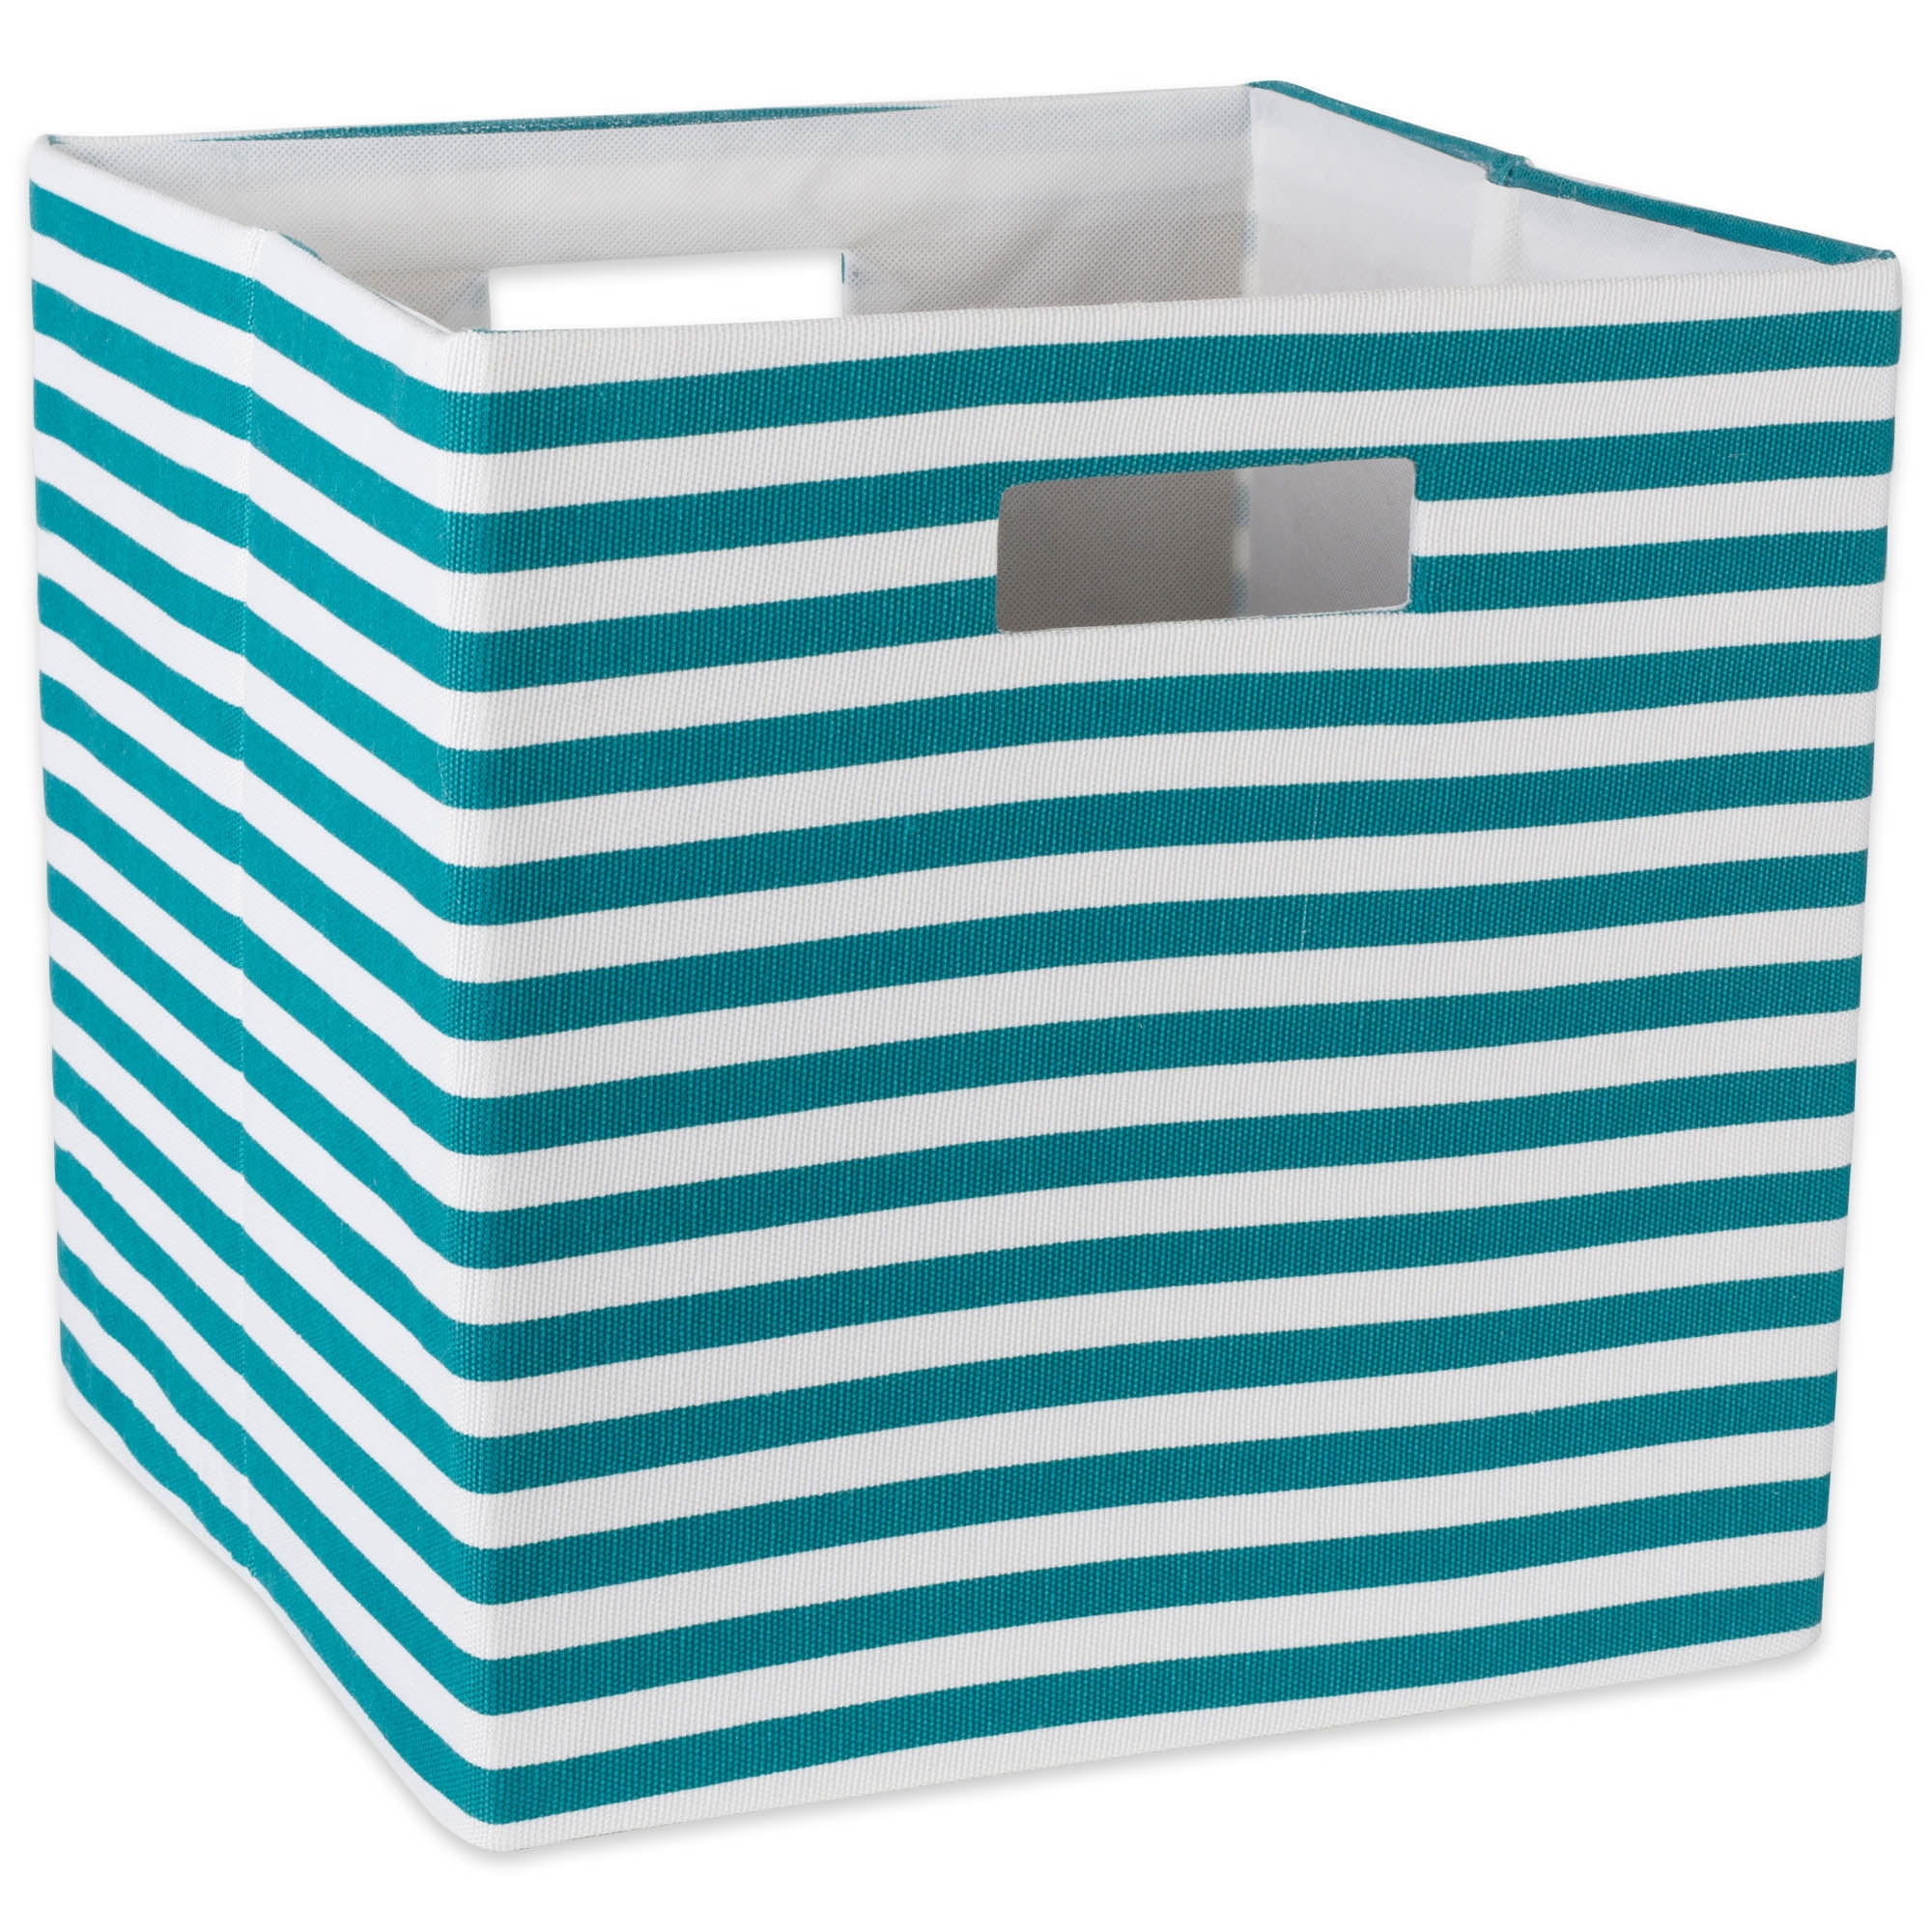 Design Imports Camz10605 13 X 13 X 13 In. Pinstripe Square Polyester Storage Cube, Teal